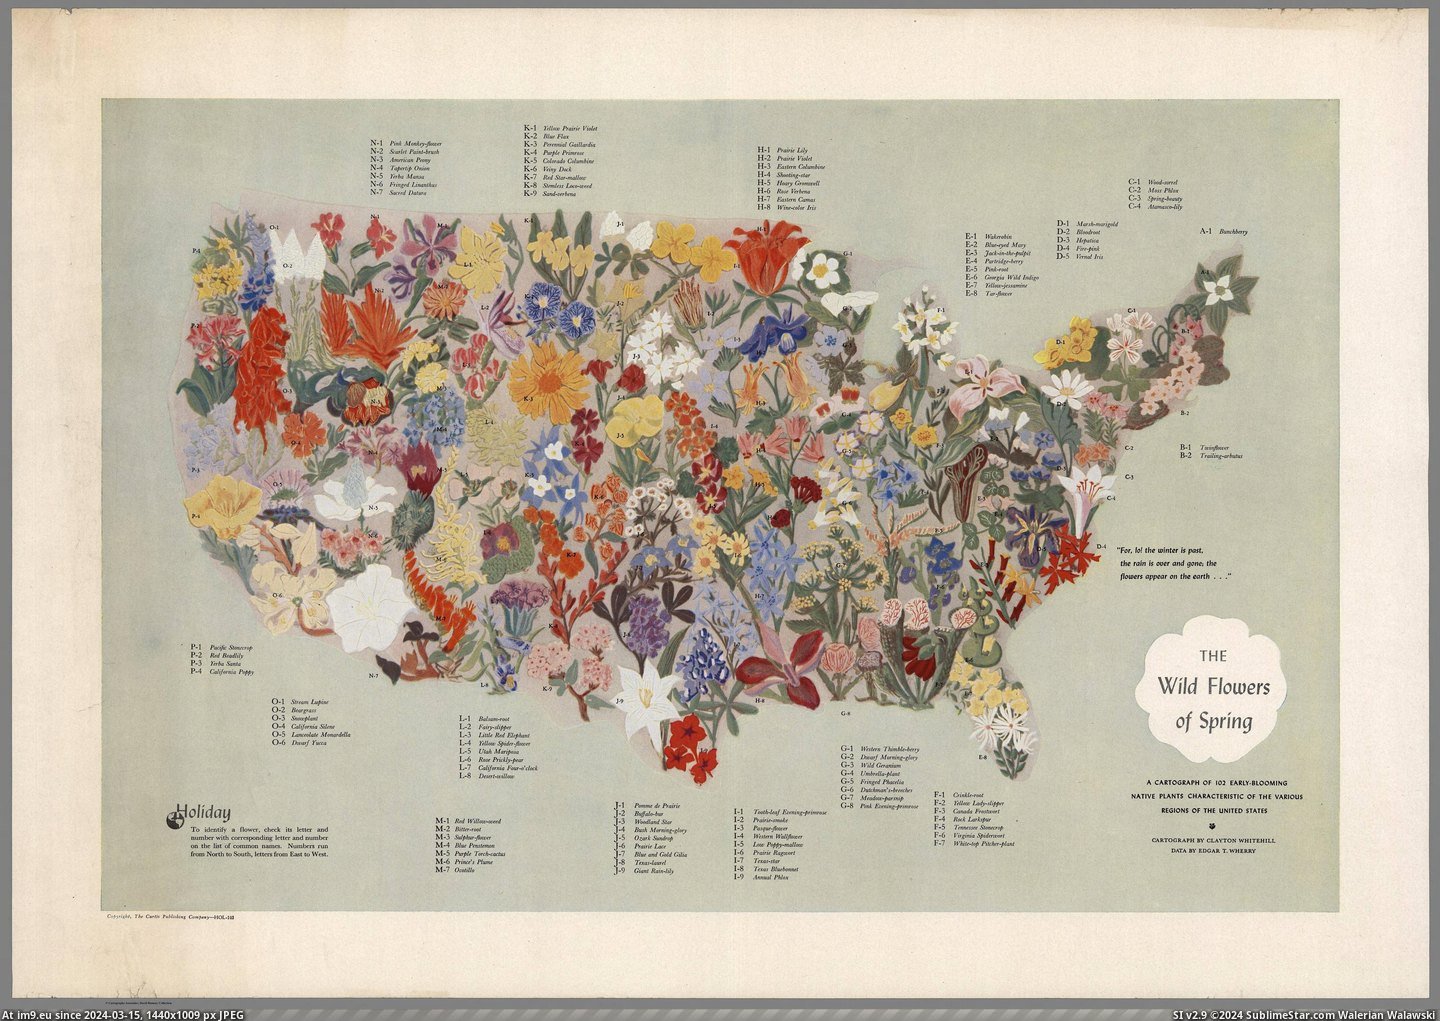 #Wild #Early #Flowers #Native #Plants #Spring #Regions #Blooming [Mapporn] The Wild Flowers of Spring, a carthograph of 102 early-blooming native plants characteristic of the various regions of Pic. (Изображение из альбом My r/MAPS favs))